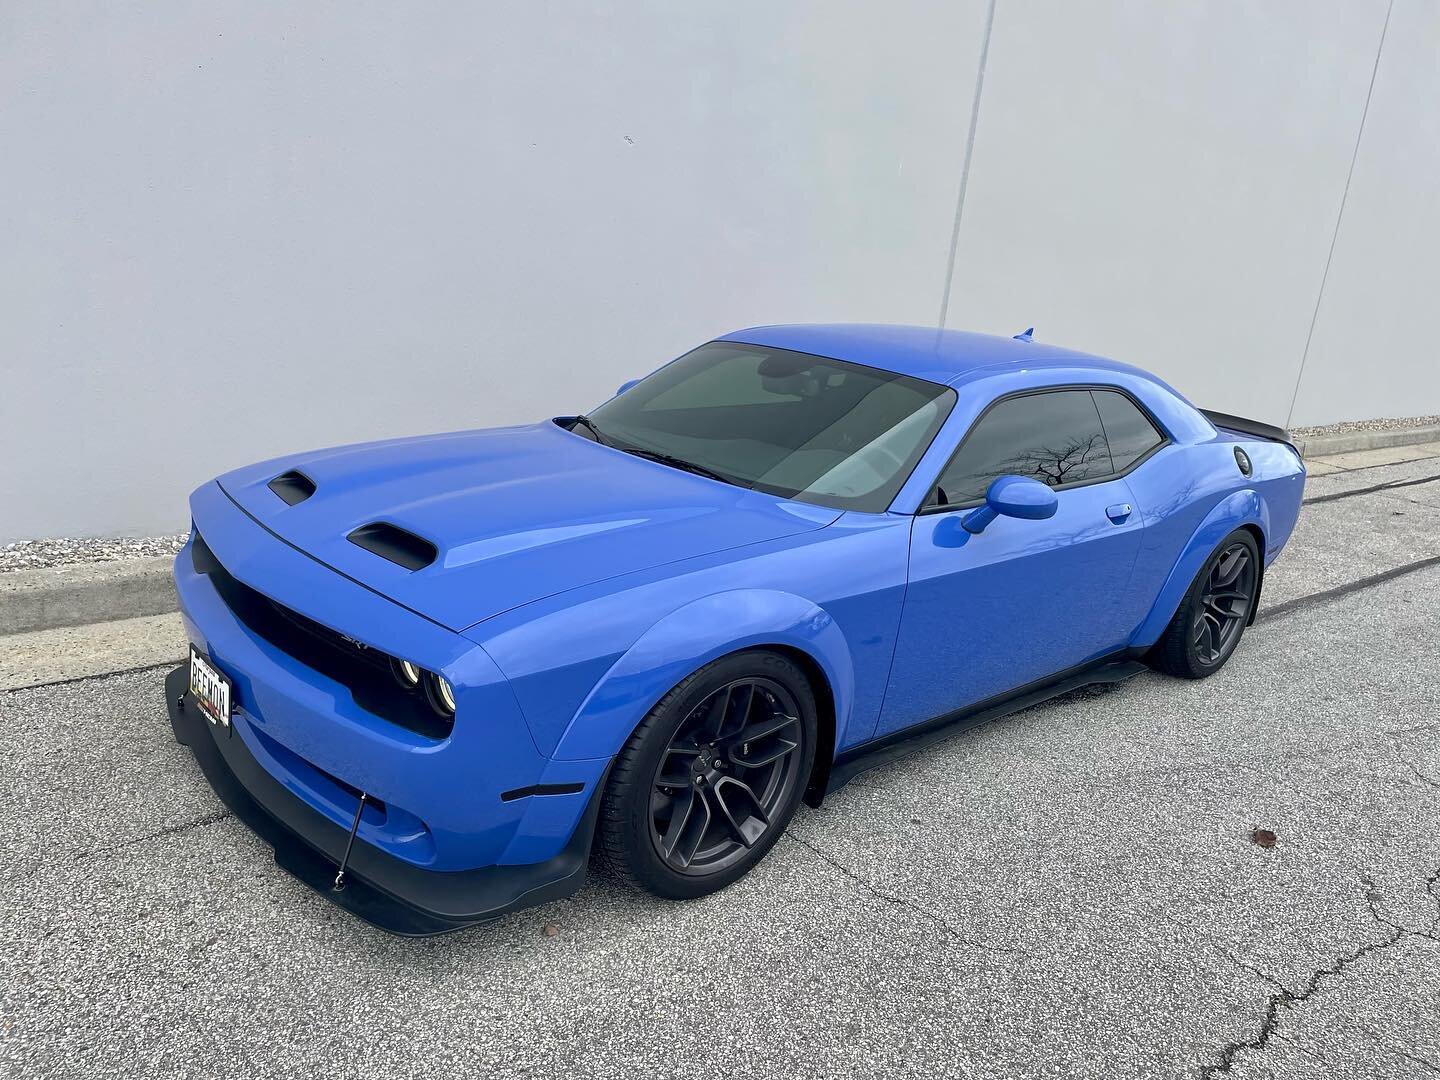 @dodgebeemon got a wild makeover from red to @inozetek Maritime Blue and turned out pretty wild #radwraps